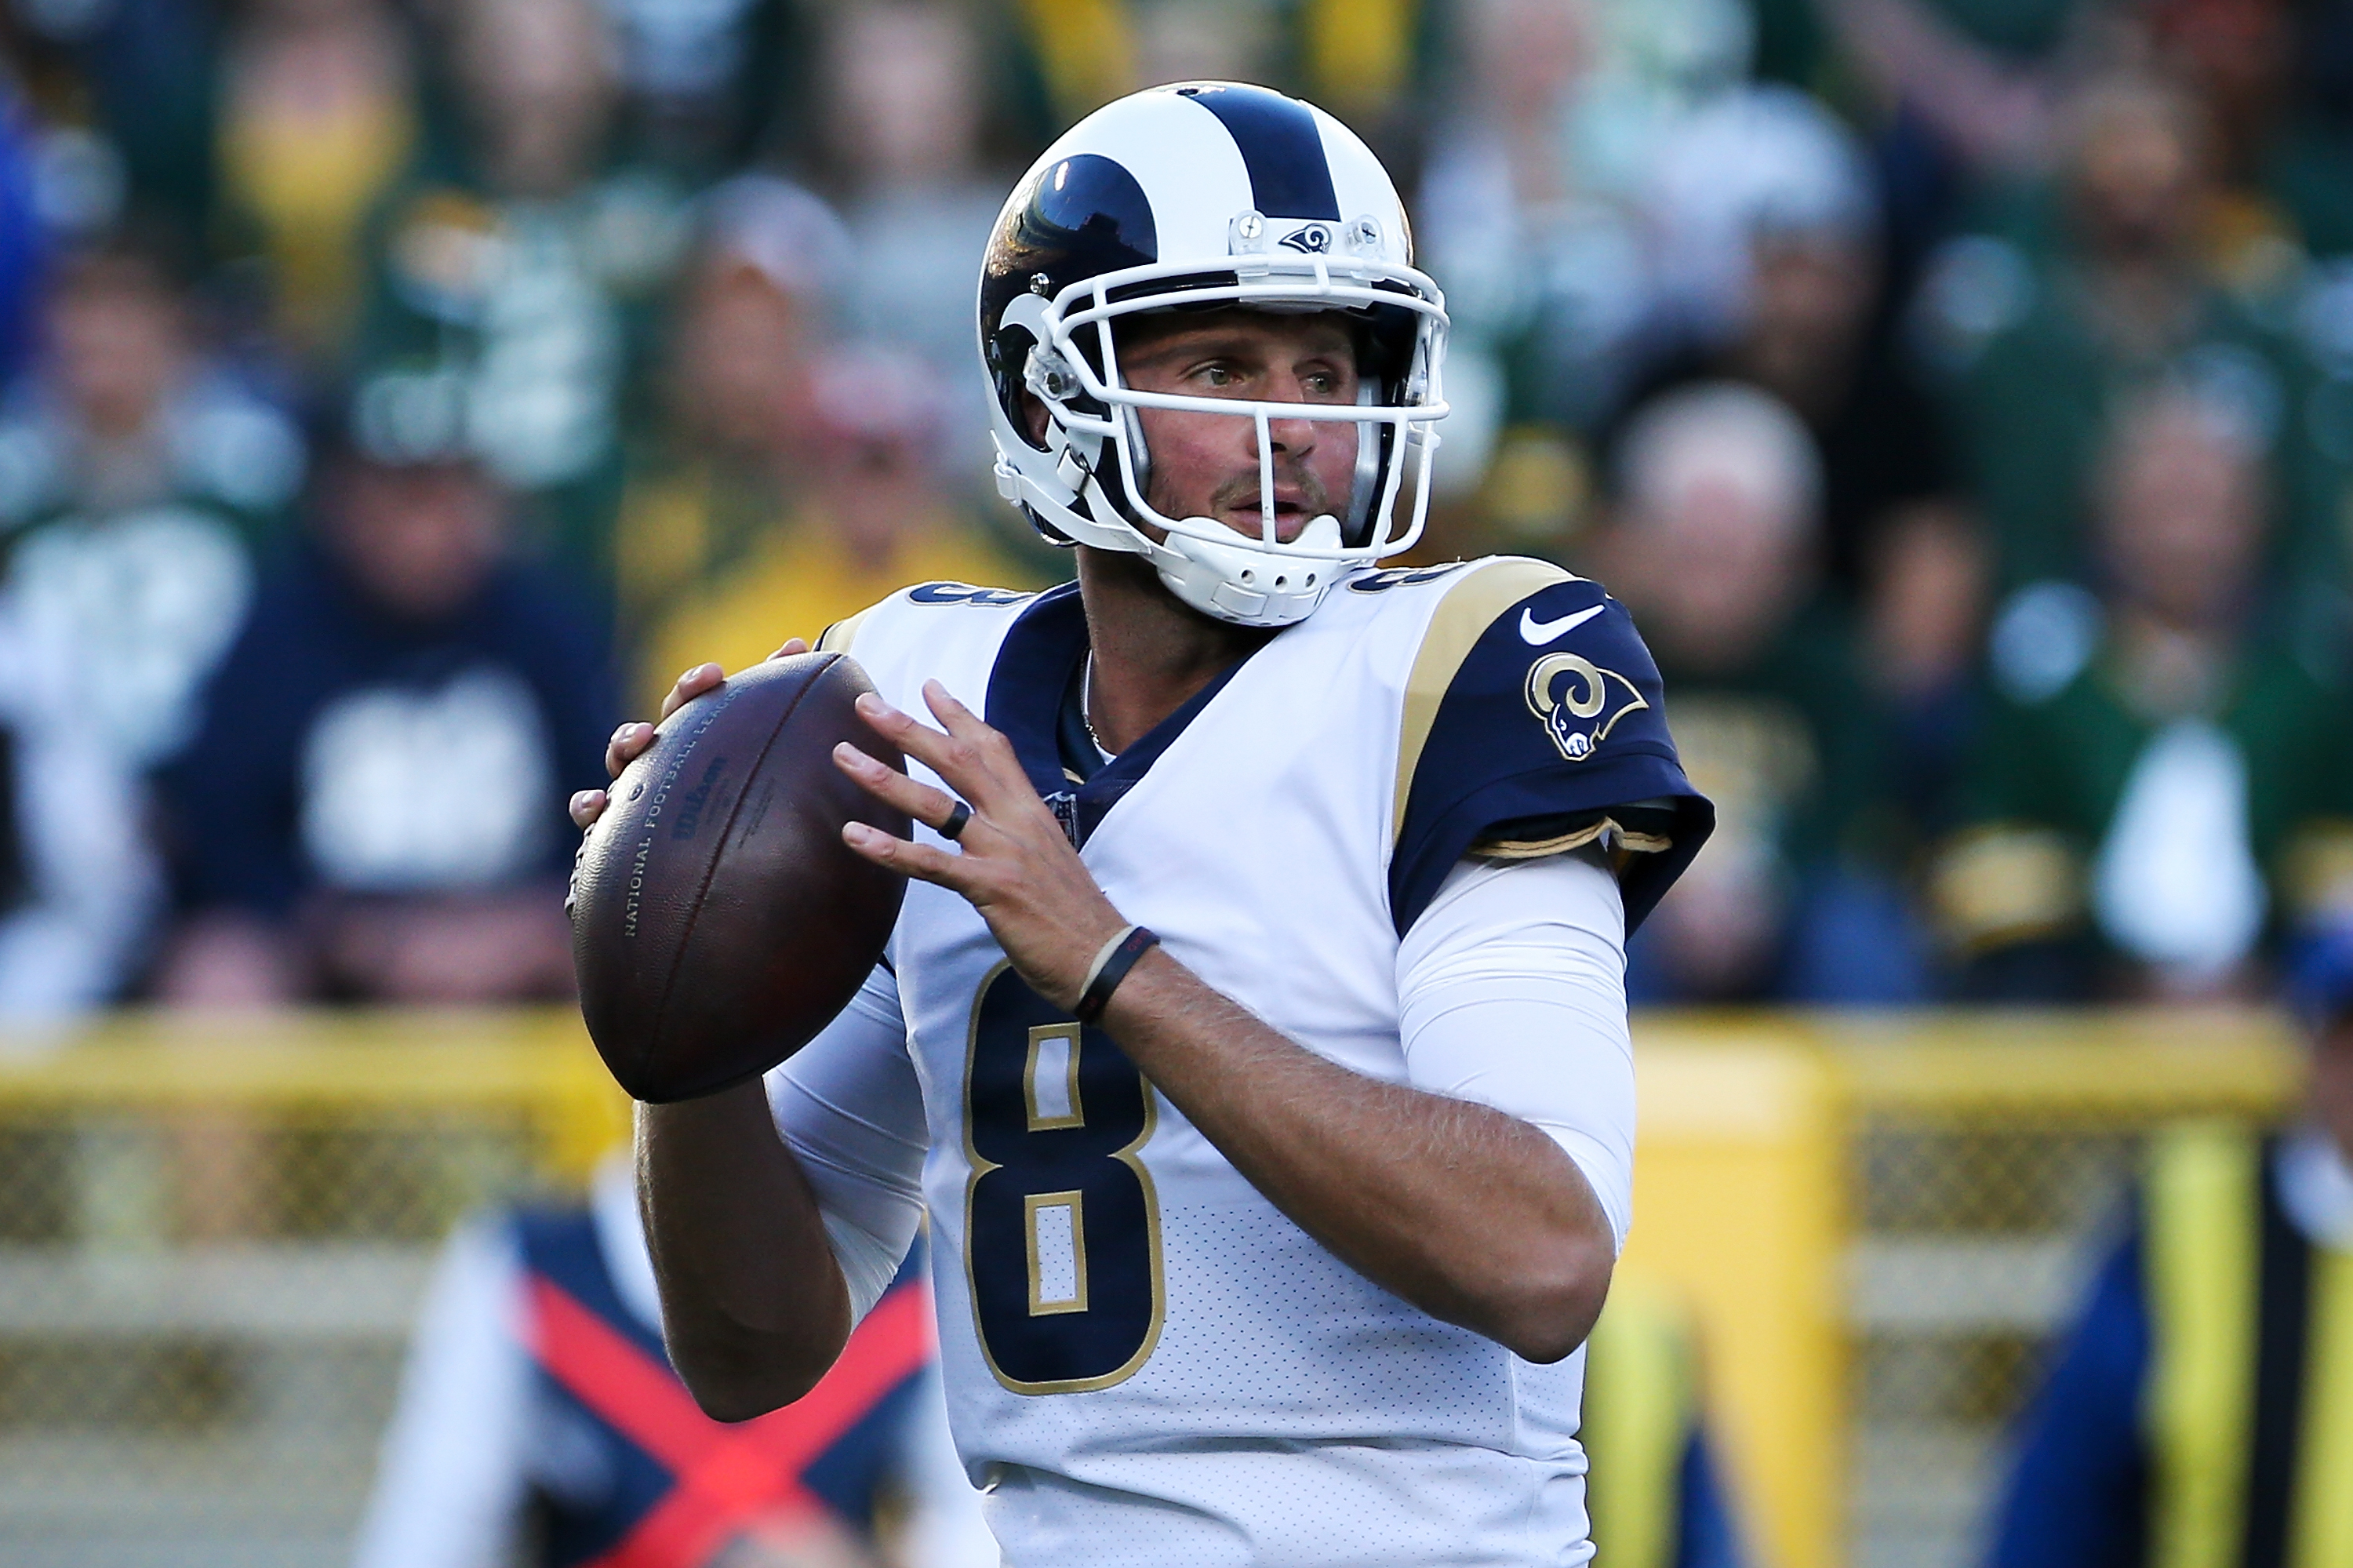 Dan Orlovsky's NFL Playoff Starting QB Rankings List is Very Controversial